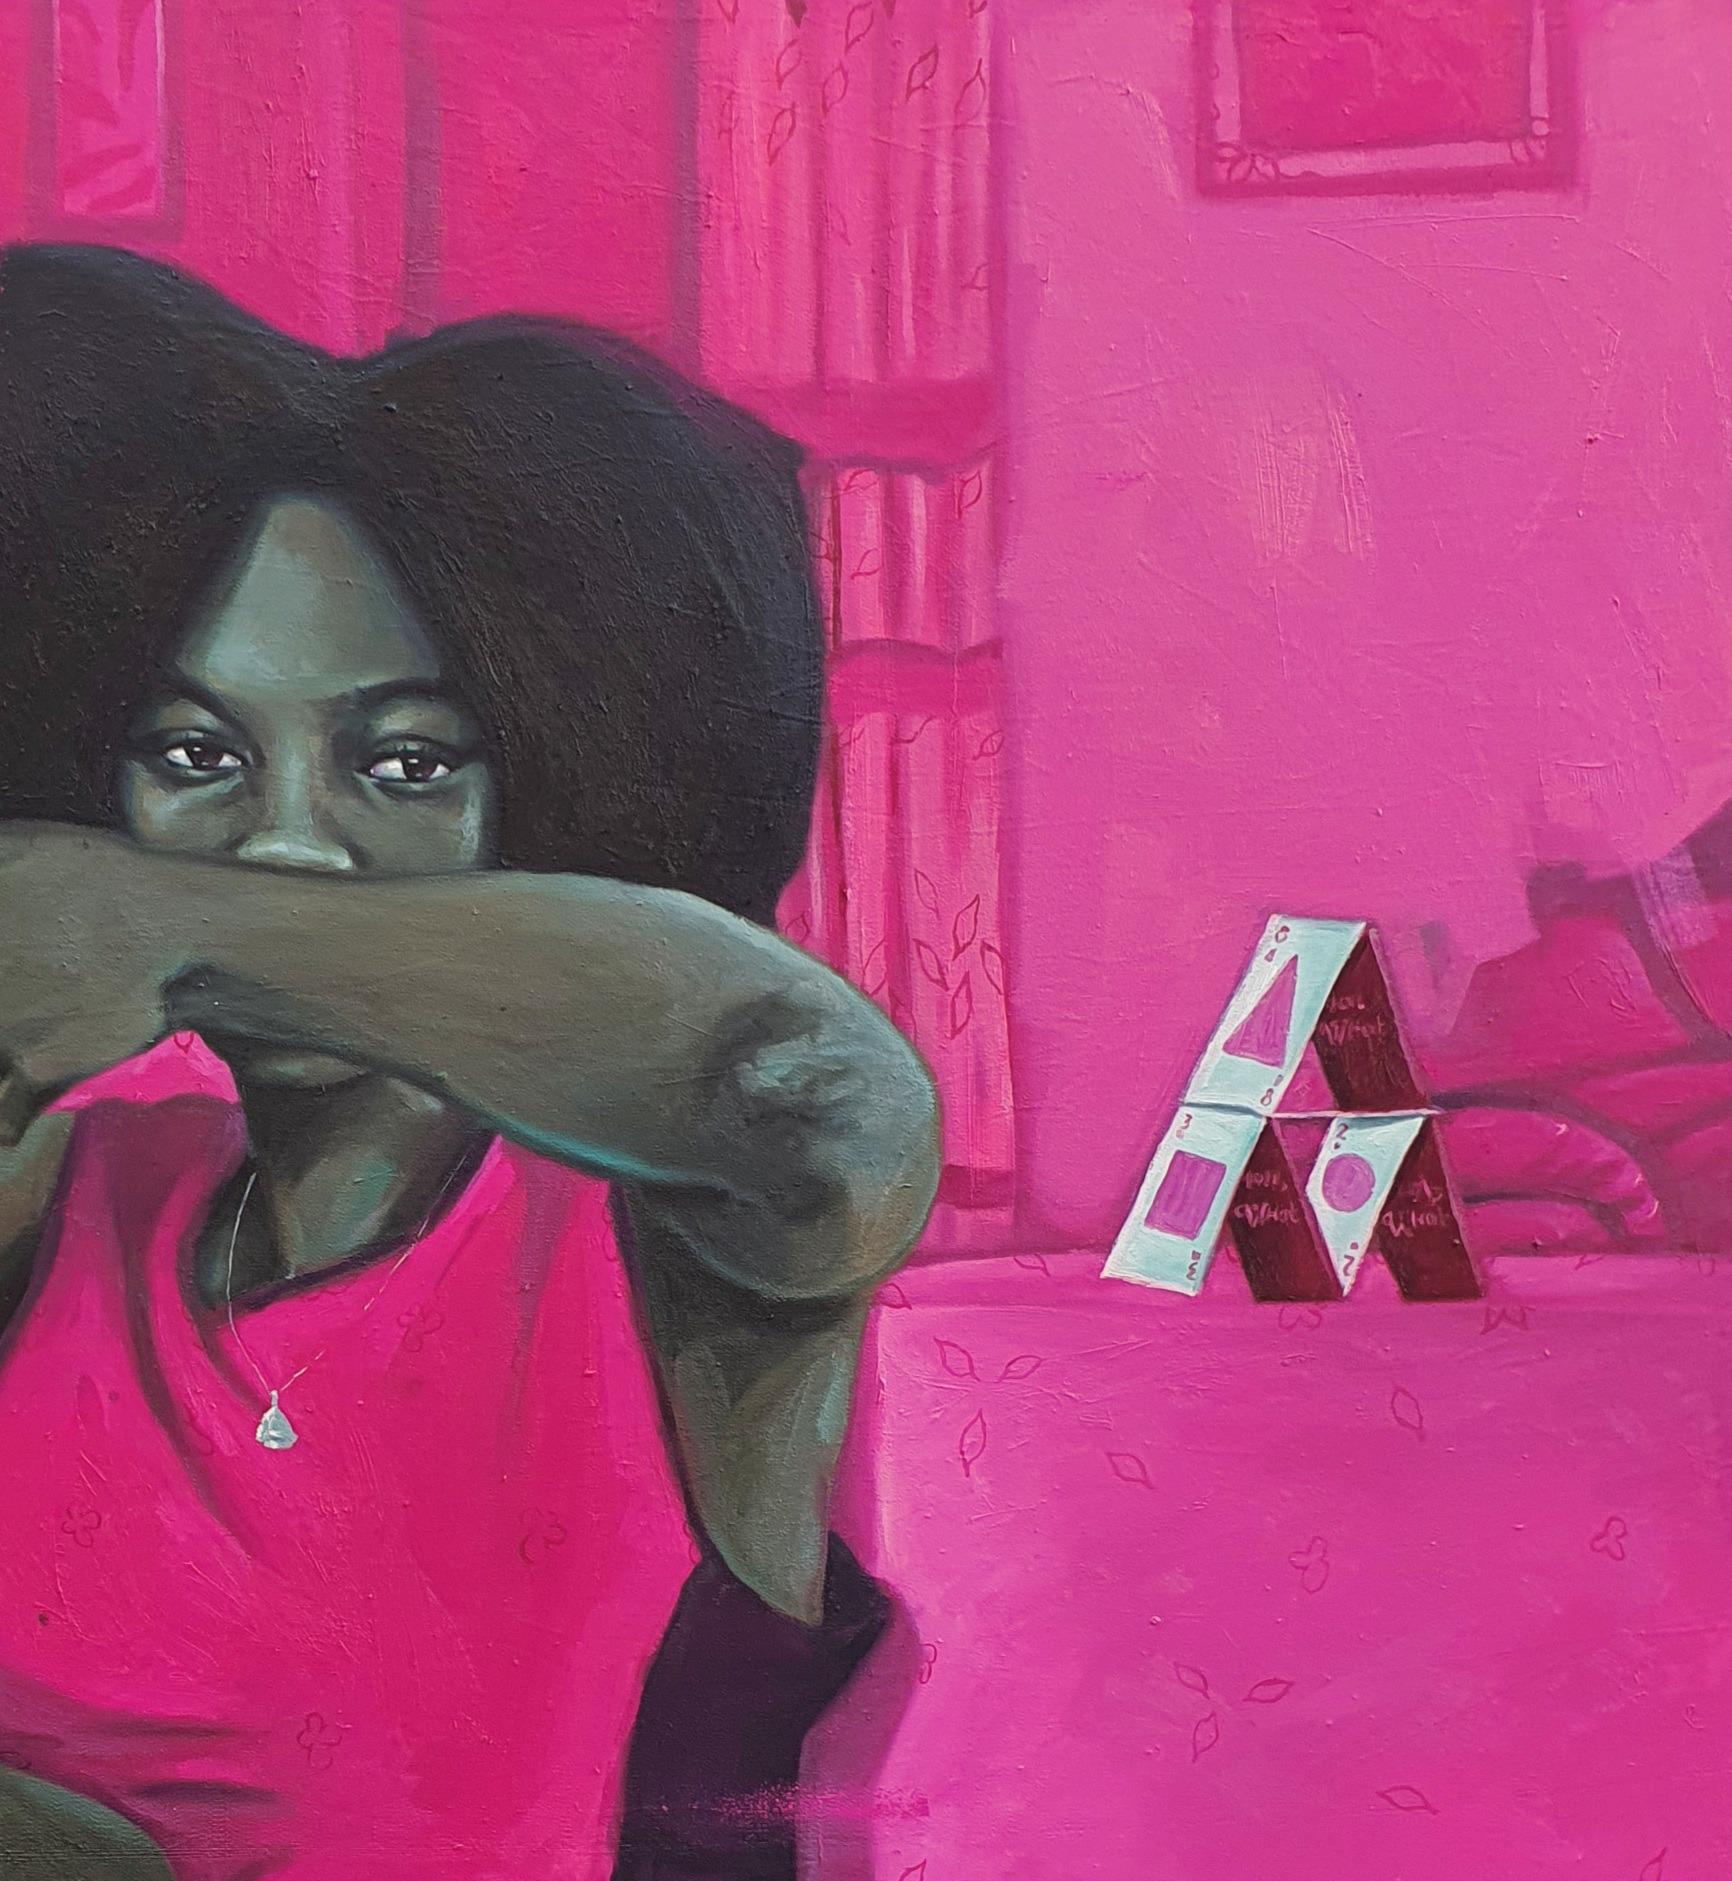 Bleasure 5 (House of Cards) - Contemporary Painting by Ajegbomogun Damilola